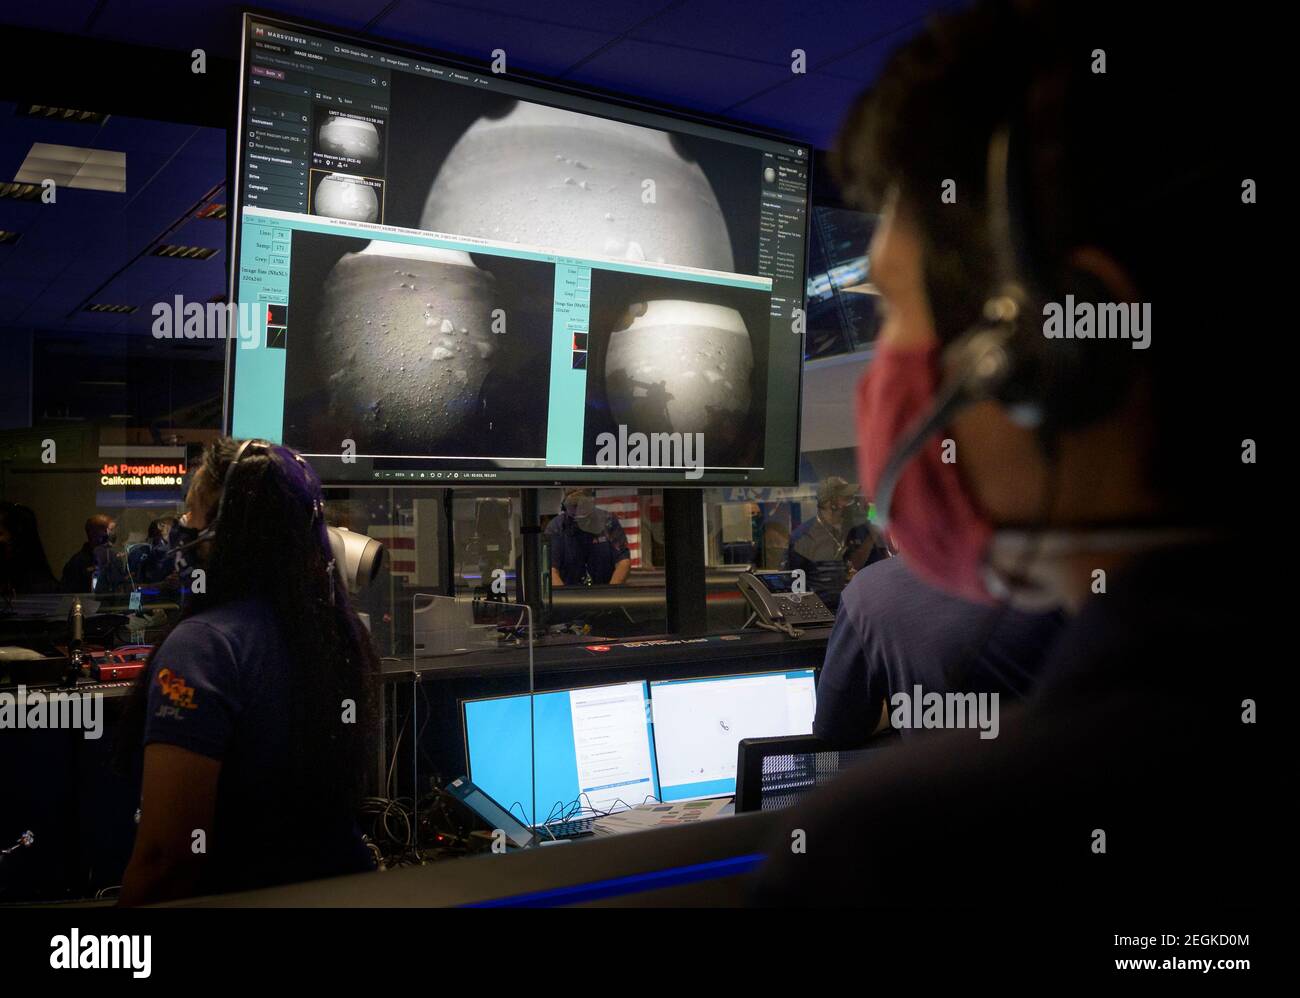 Pasadena, California, USA. 18th Feb, 2021. Members of NASA's Perseverance Mars rover team watch in mission control as the first images arrive moments after the spacecraft successfully touched down on Mars, Thursday, Feb. 18, 2021, at NASA's Jet Propulsion Laboratory in Pasadena, California. A key objective for Perseverance's mission on Mars is astrobiology, including the search for signs of ancient microbial life. Credit: dpa picture alliance/Alamy Live News Stock Photo